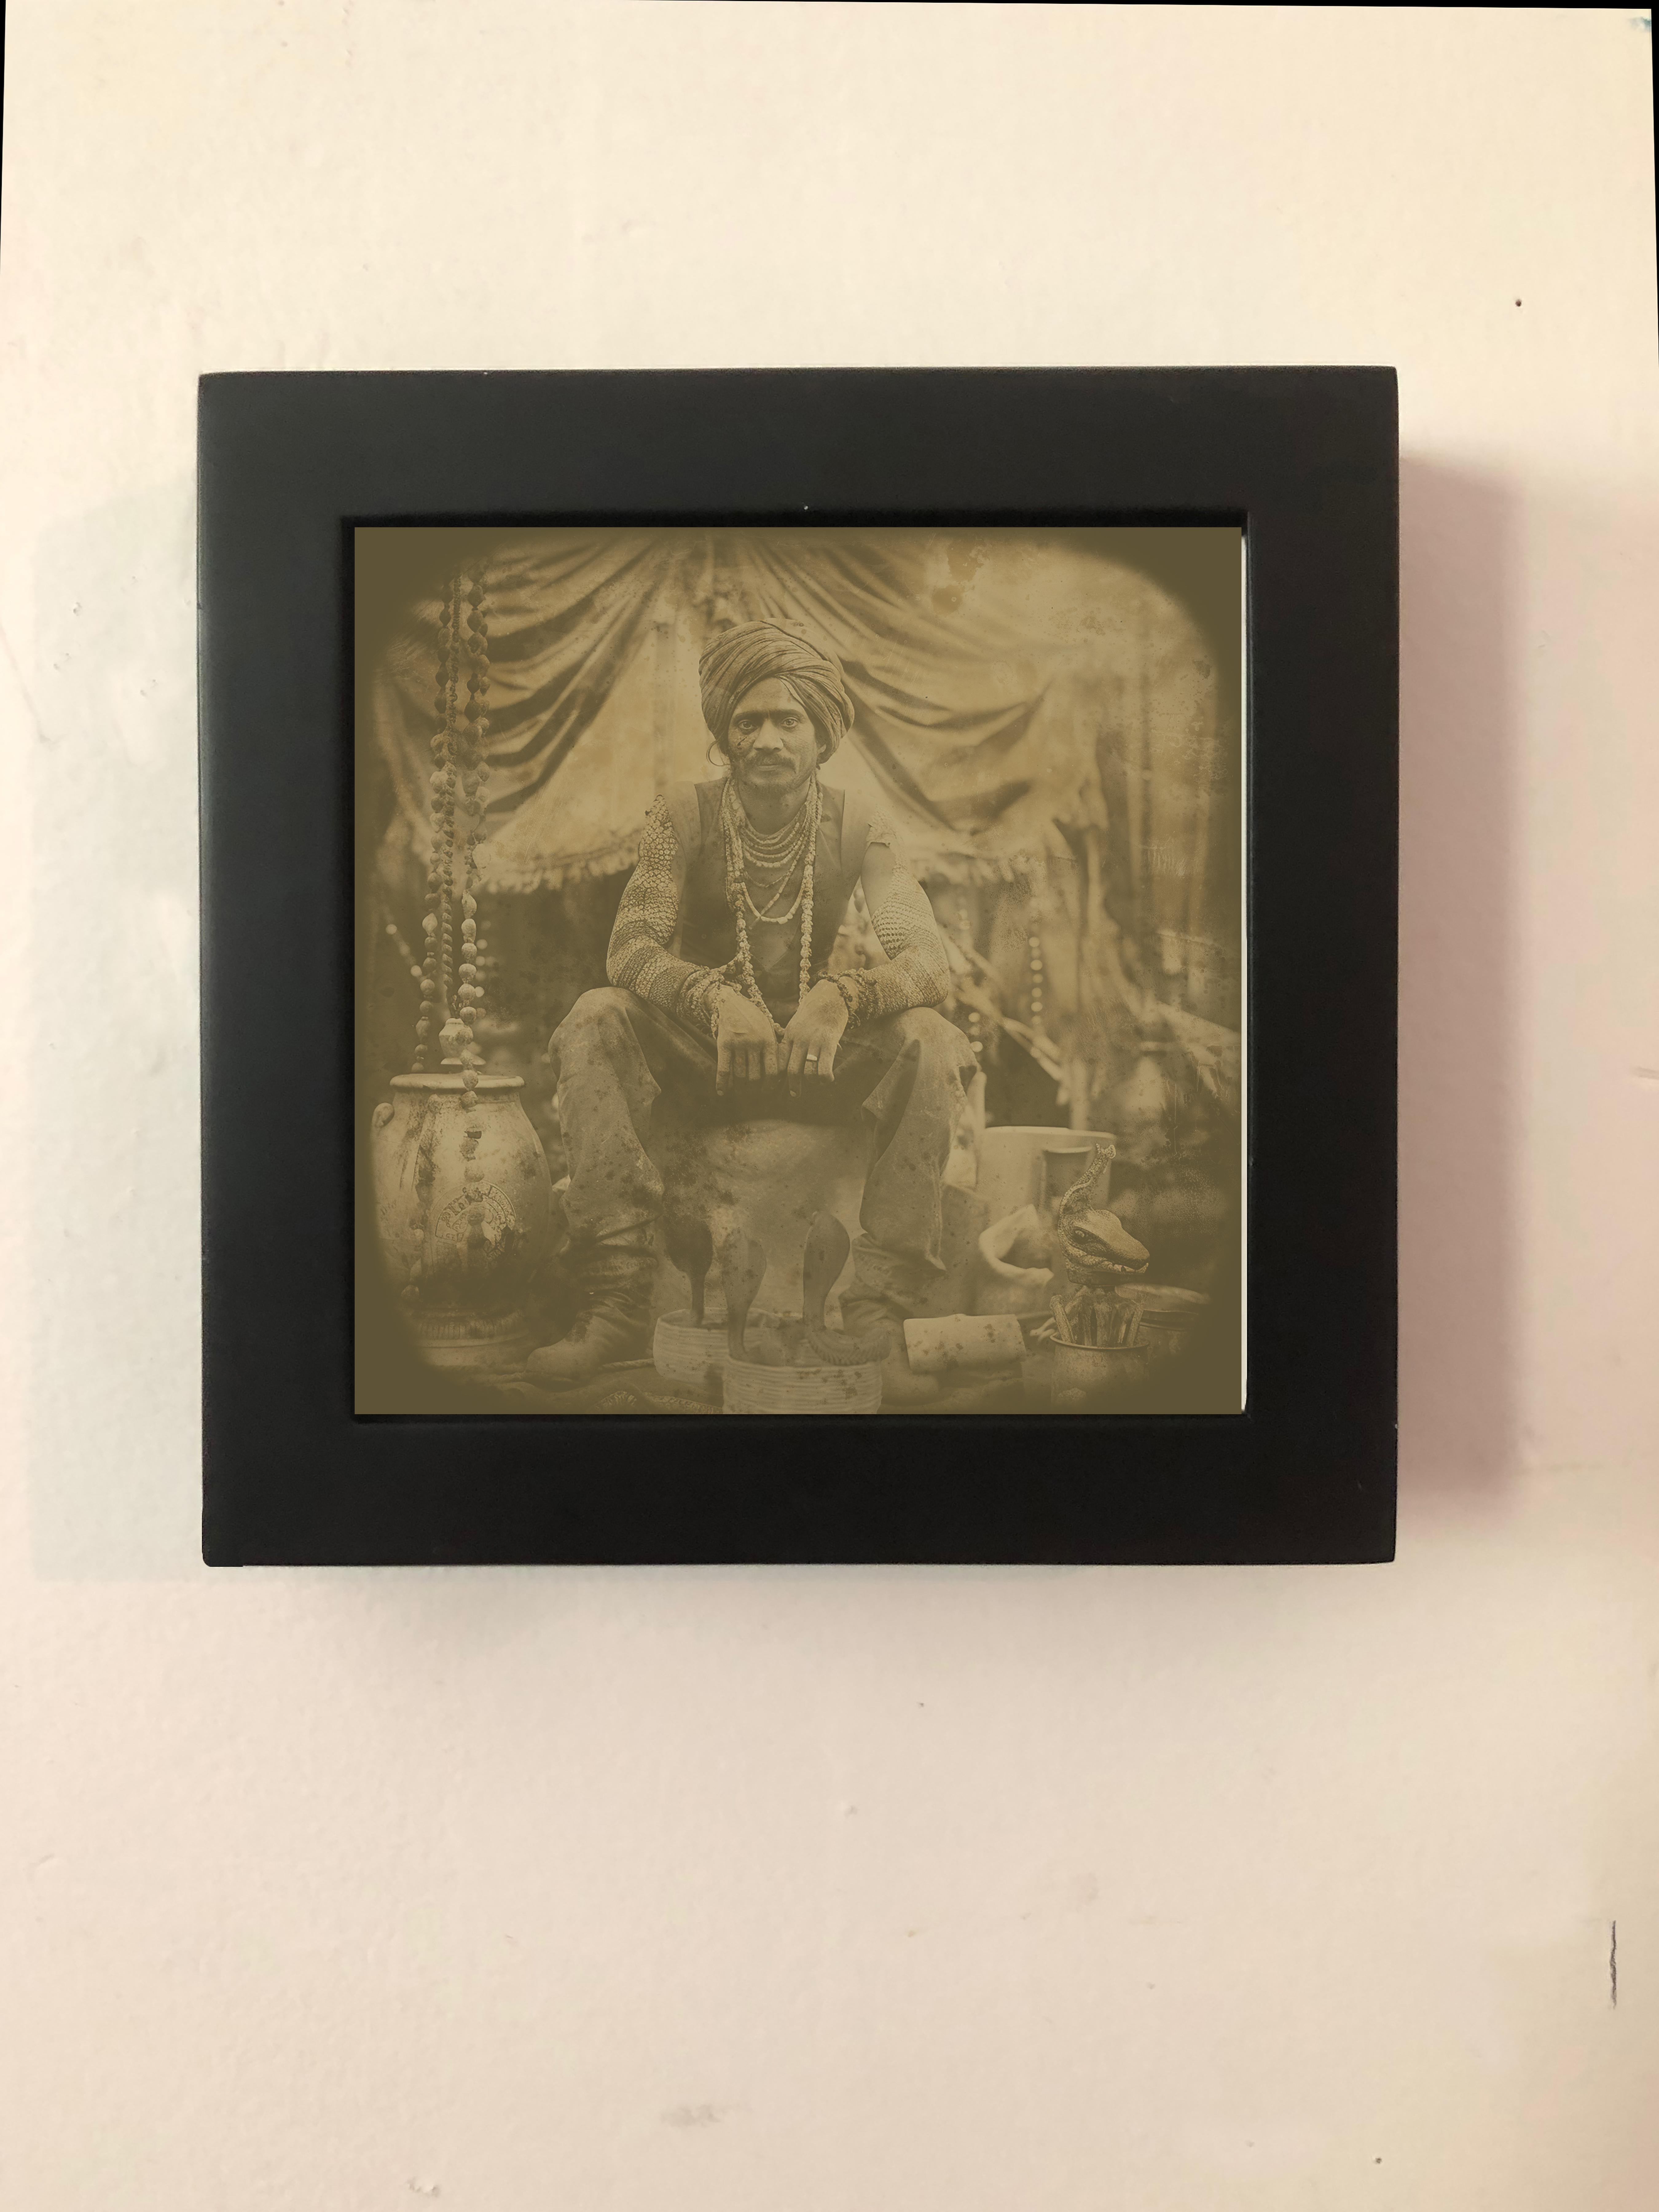 Snake Charmer - exotic daguerreotype reproduction Framed - Photograph by FPA Francis Pavy Artist